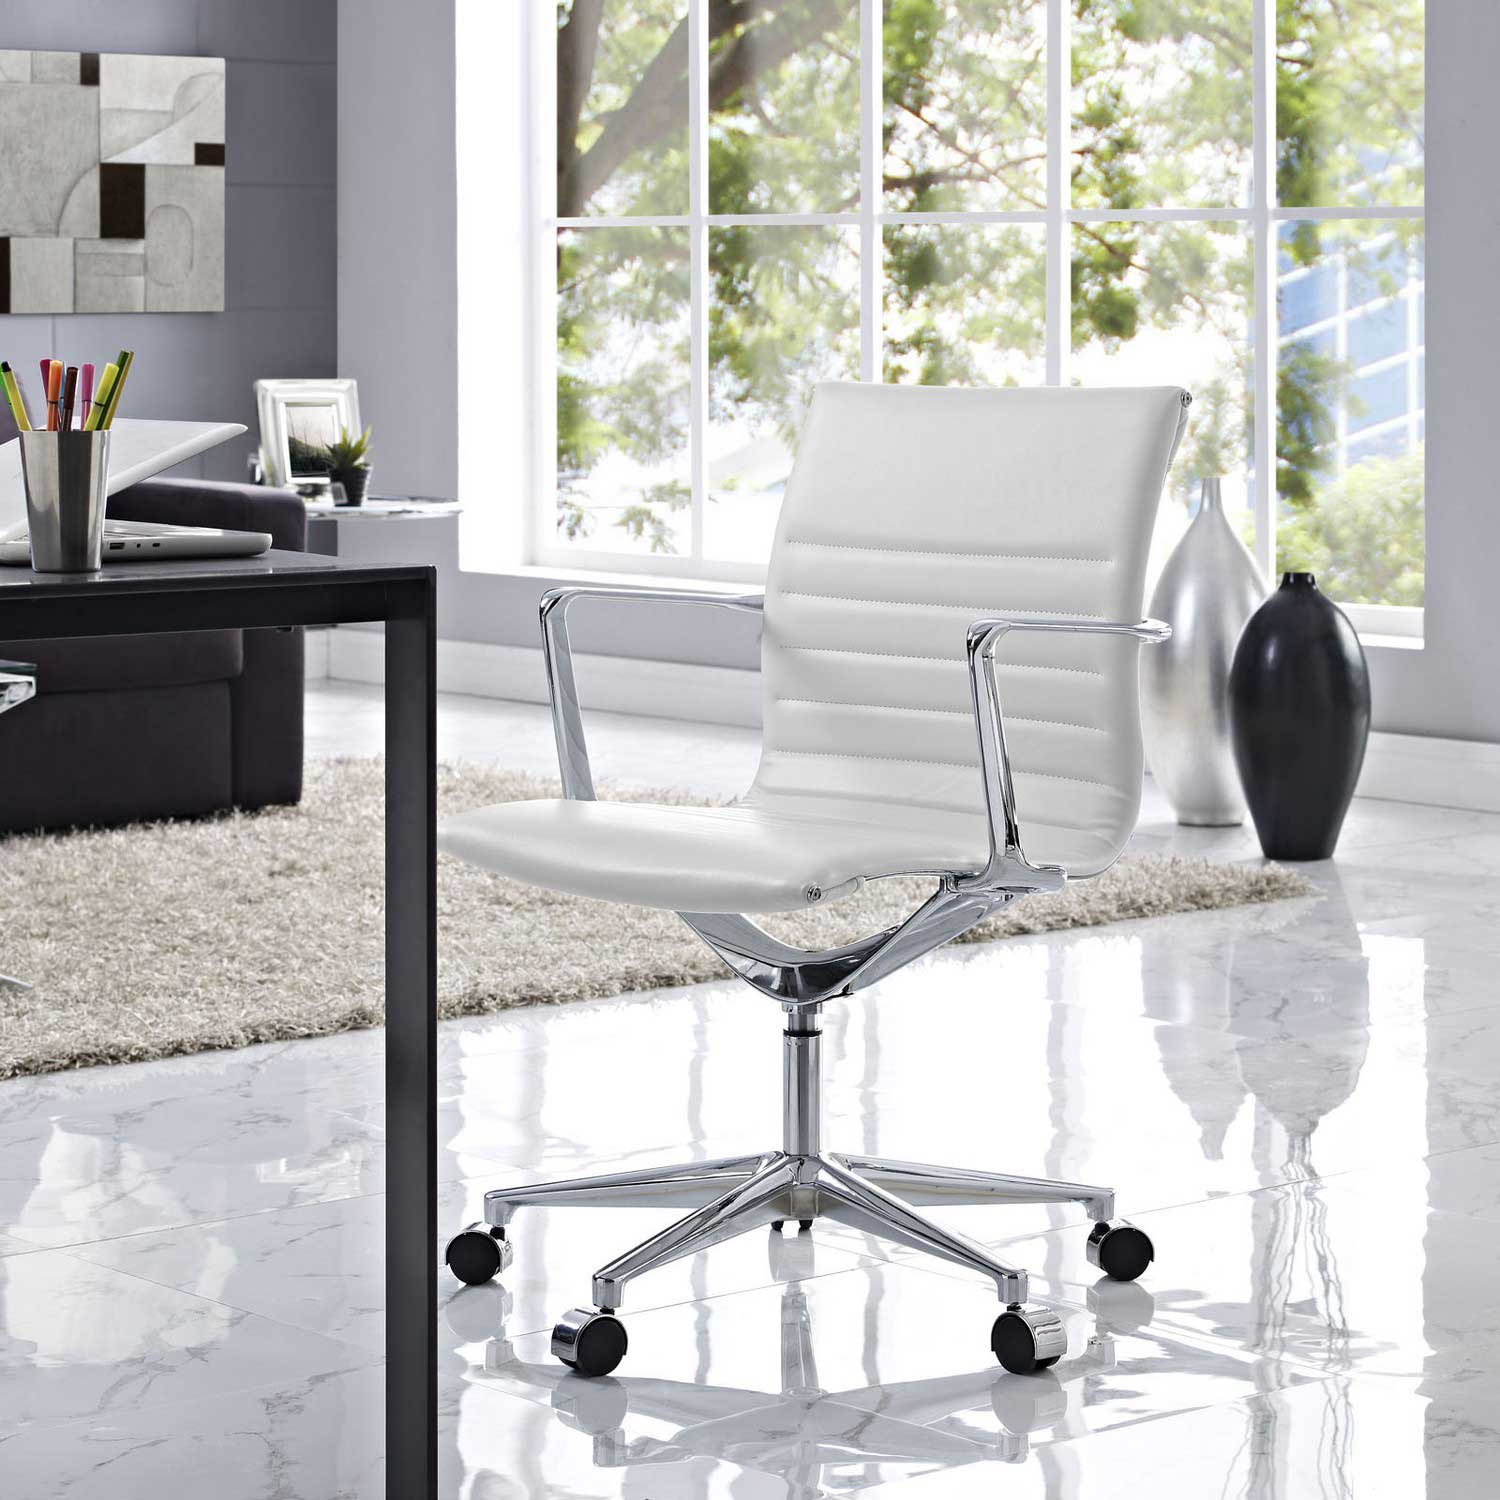 Modway Vi Mid Back Office Chair - White